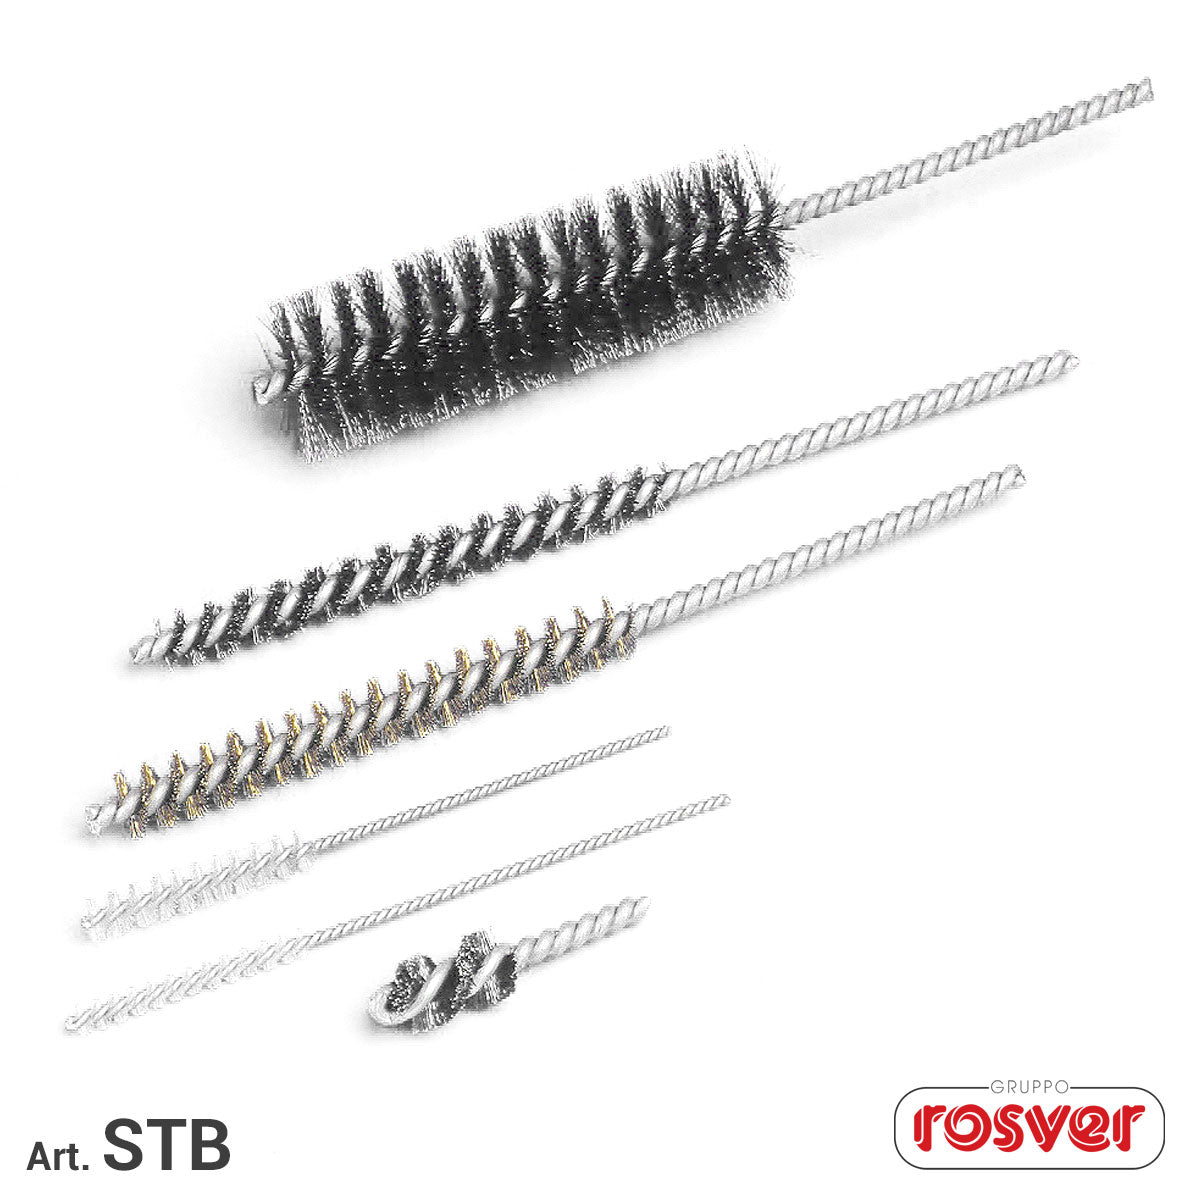 Tube brushes - Rosver - STB - Conf.10pz